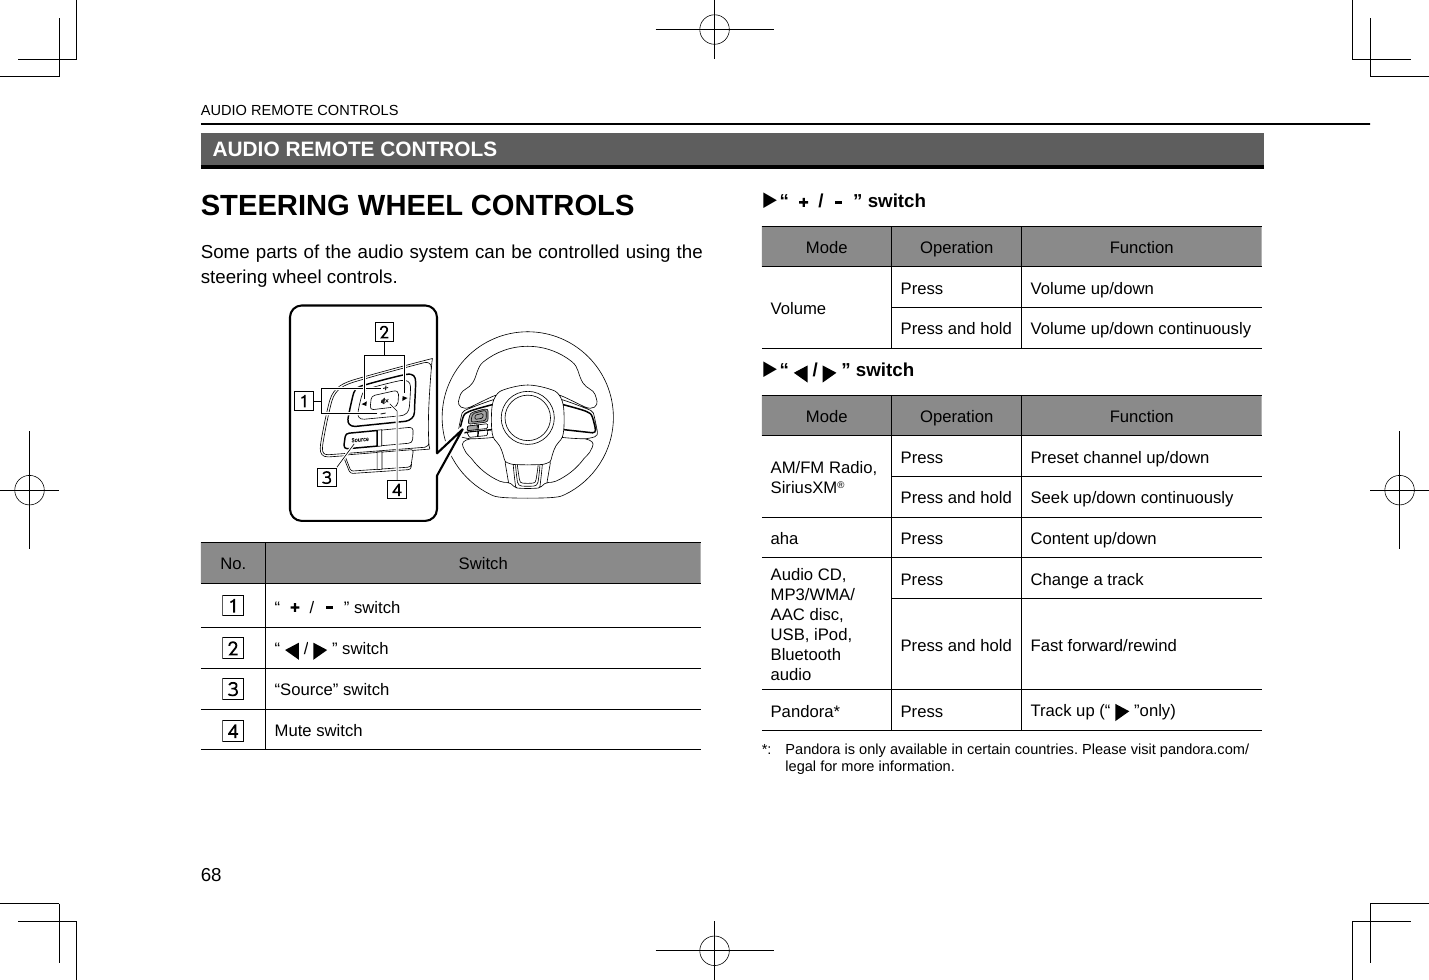 AUDIO REMOTE CONTROLSSTEERING WHEEL CONTROLSSome parts of the audio system can be controlled using the steering wheel controls.No. Switch“ / ” switch“ / ” switch“Source” switch Mute switch  X“ / ” switchMode Operation FunctionVolumePress Volume up/downPress and hold Volume up/down continuously X“ / ” switchMode Operation FunctionAM/FM Radio, SiriusXM®Press Preset channel up/downPress and hold Seek up/down continuouslyaha Press Content up/downAudio CD,MP3/WMA/AAC disc,USB, iPod, Bluetooth audioPress Change a trackPress and hold Fast forward/rewindPandora* Press Track up (“ ”only)*:  Pandora is only available in certain countries. Please visit pandora.com/legal for more information.AUDIO REMOTE CONTROLS68